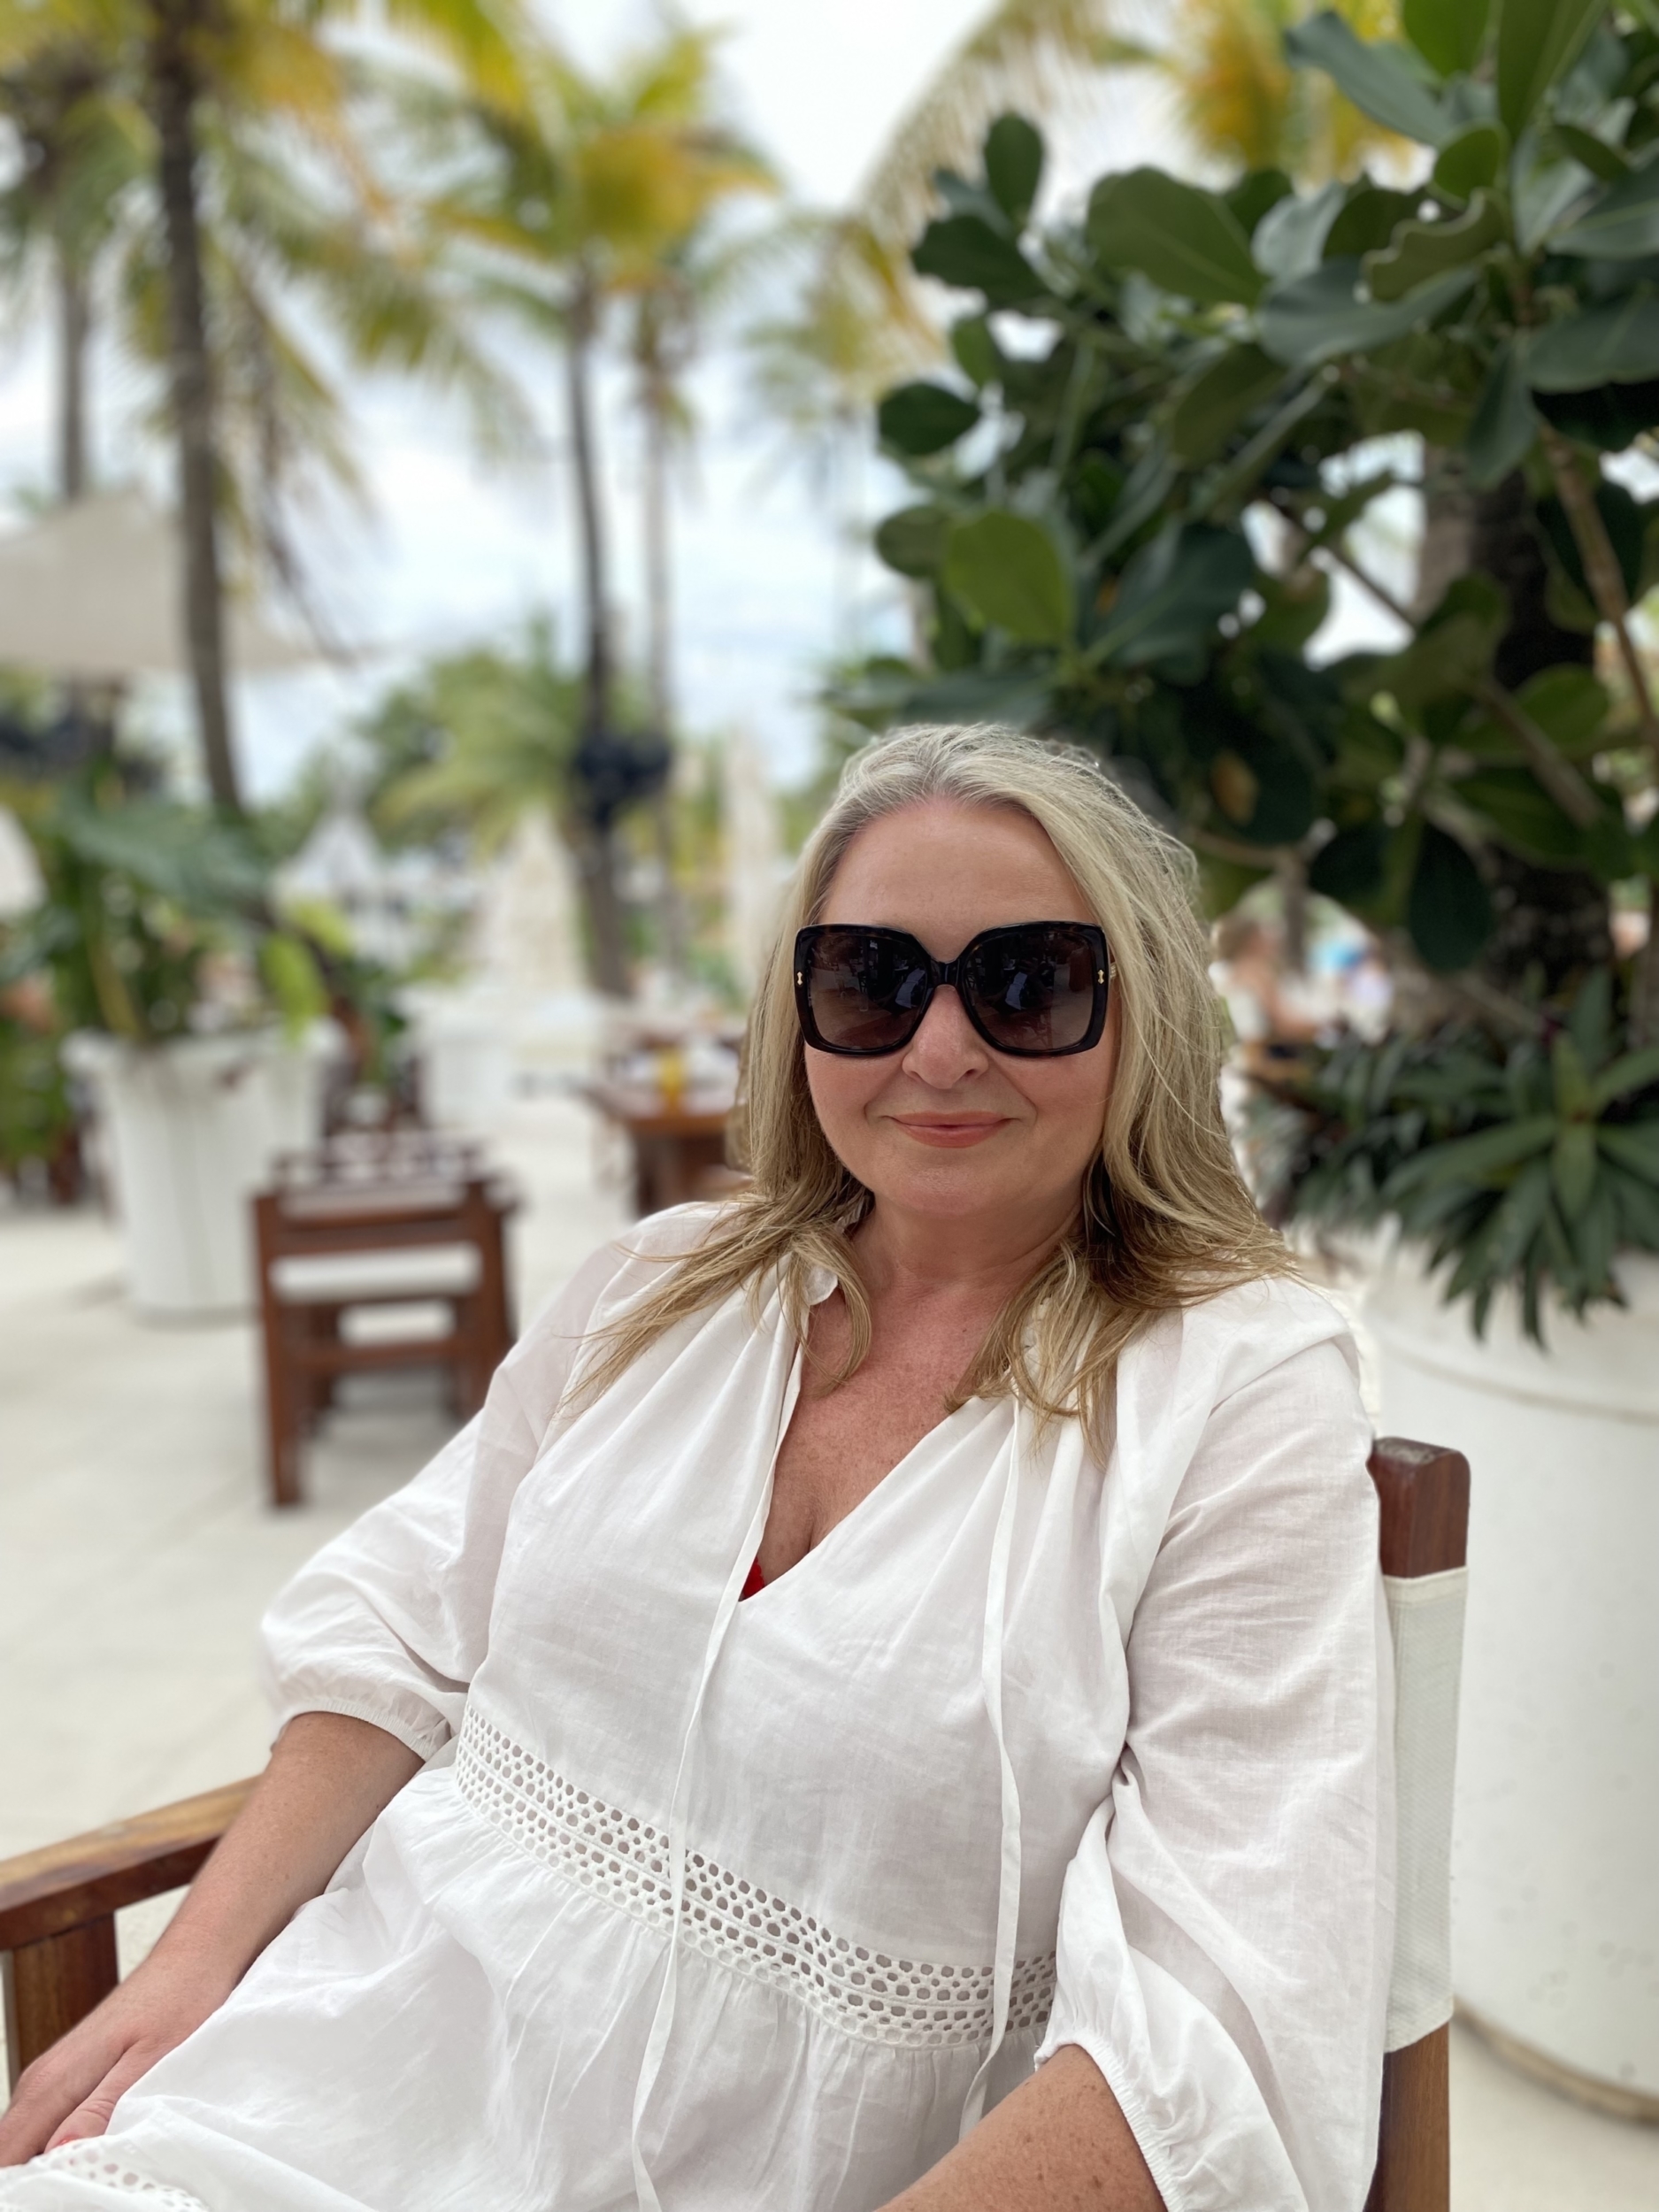 Gillian McMichael reflects on life as a personal growth & abundance coach. Learn more about our wellness coaching programs which can help to create a joyful, vibrant & healthy life.